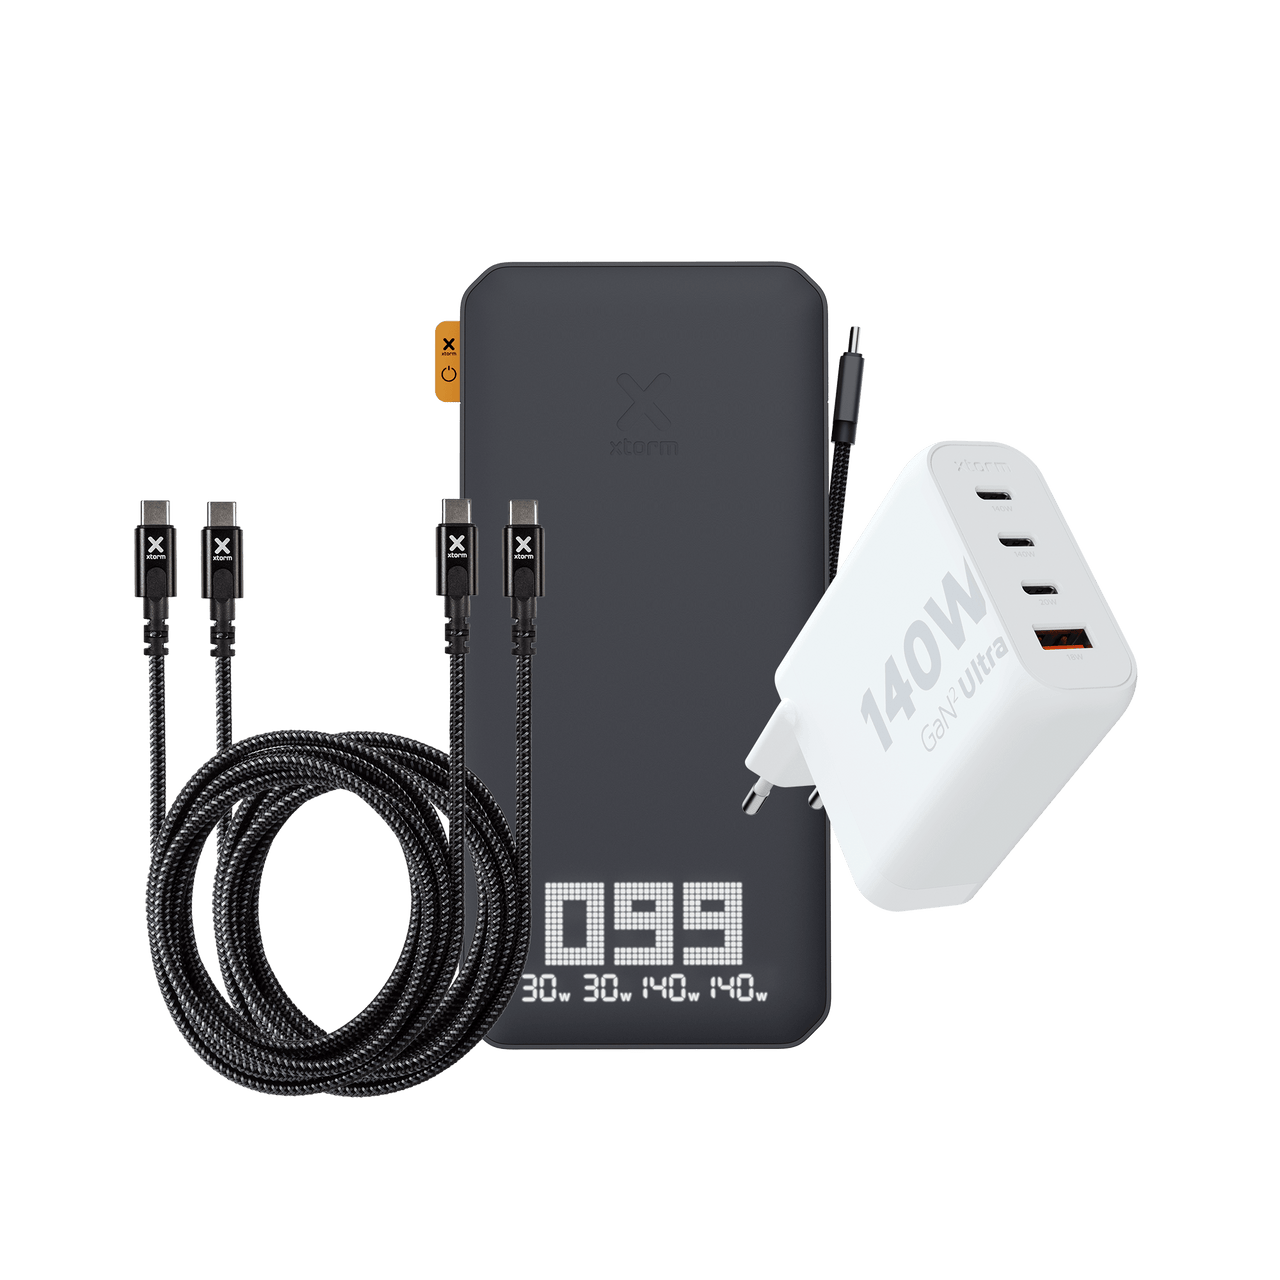 XB403 + 2x USB-C PD 240W Cable + Fast Charge Adapter 140W - Xtorm EU